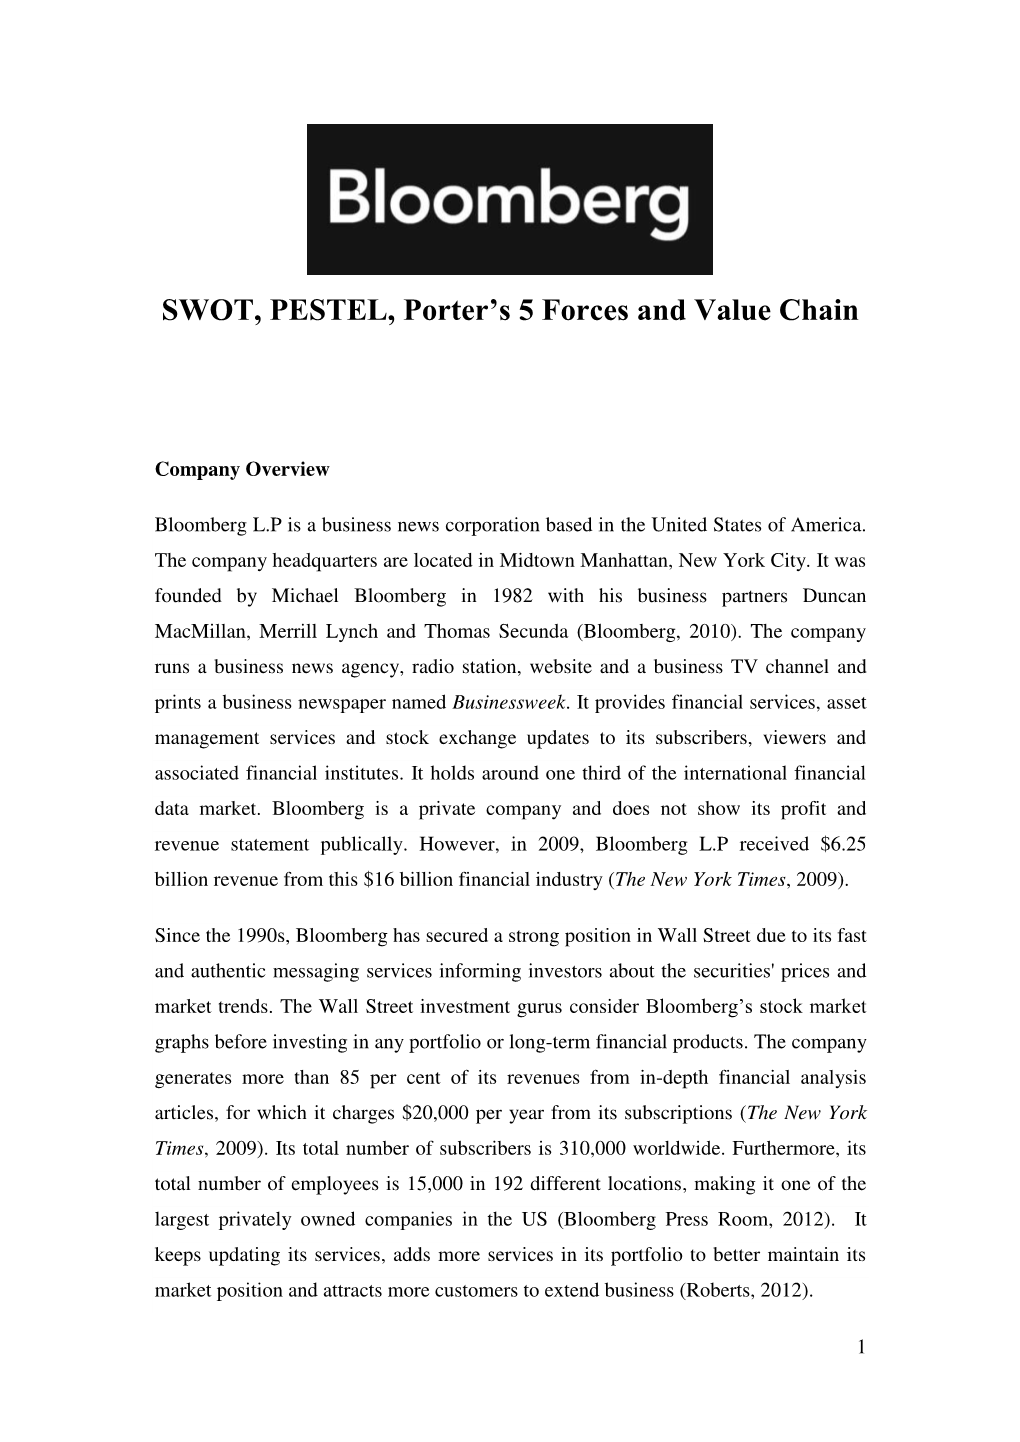 SWOT, PESTEL, Porter's 5 Forces and Value Chain